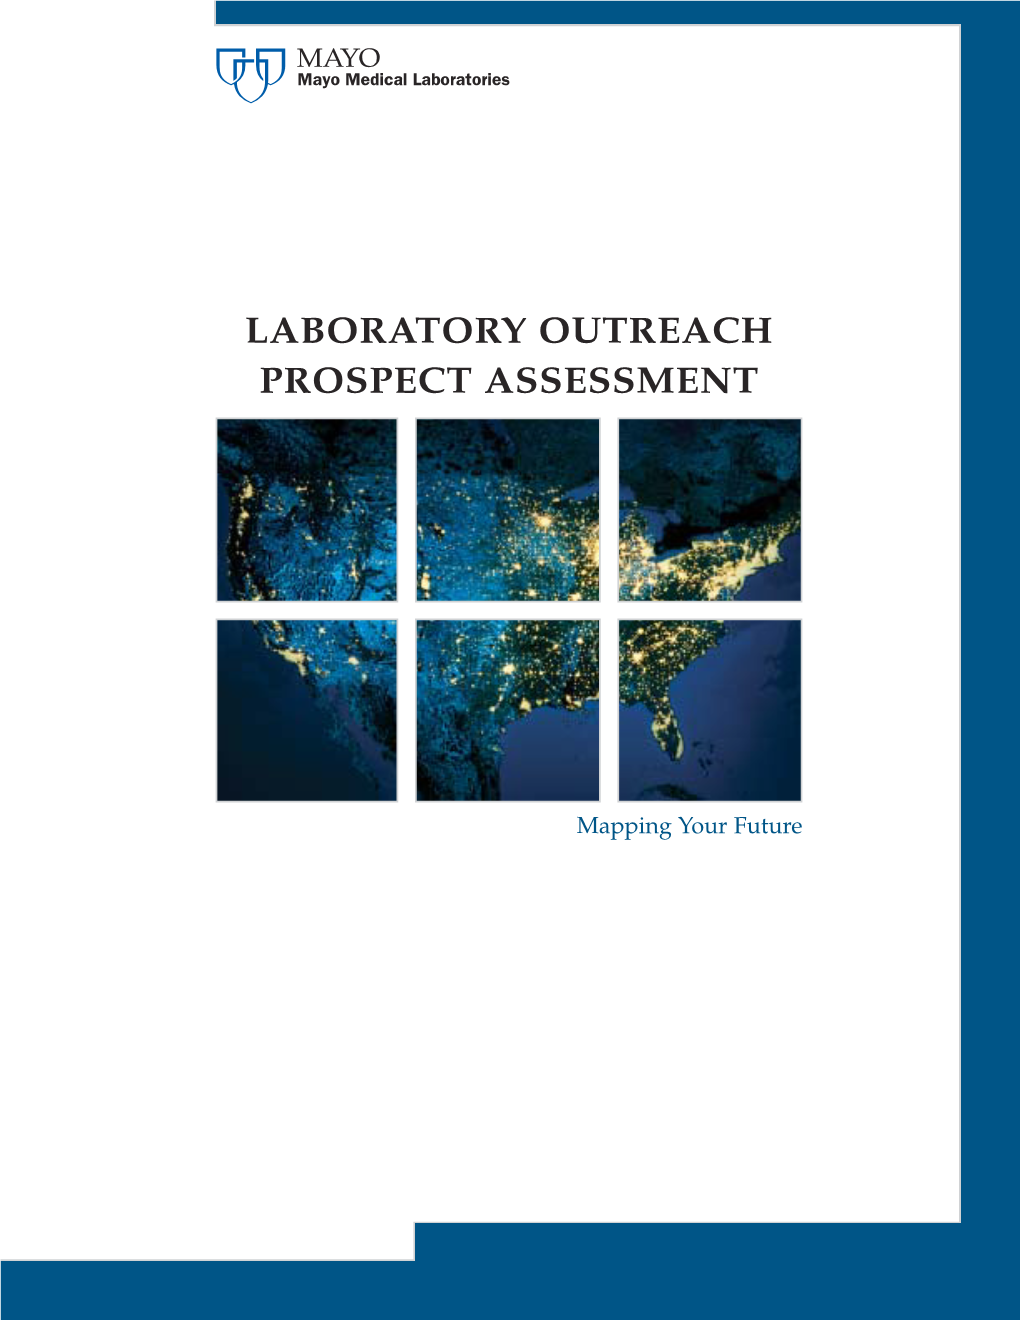 Laboratory Outreach Prospect Assessment